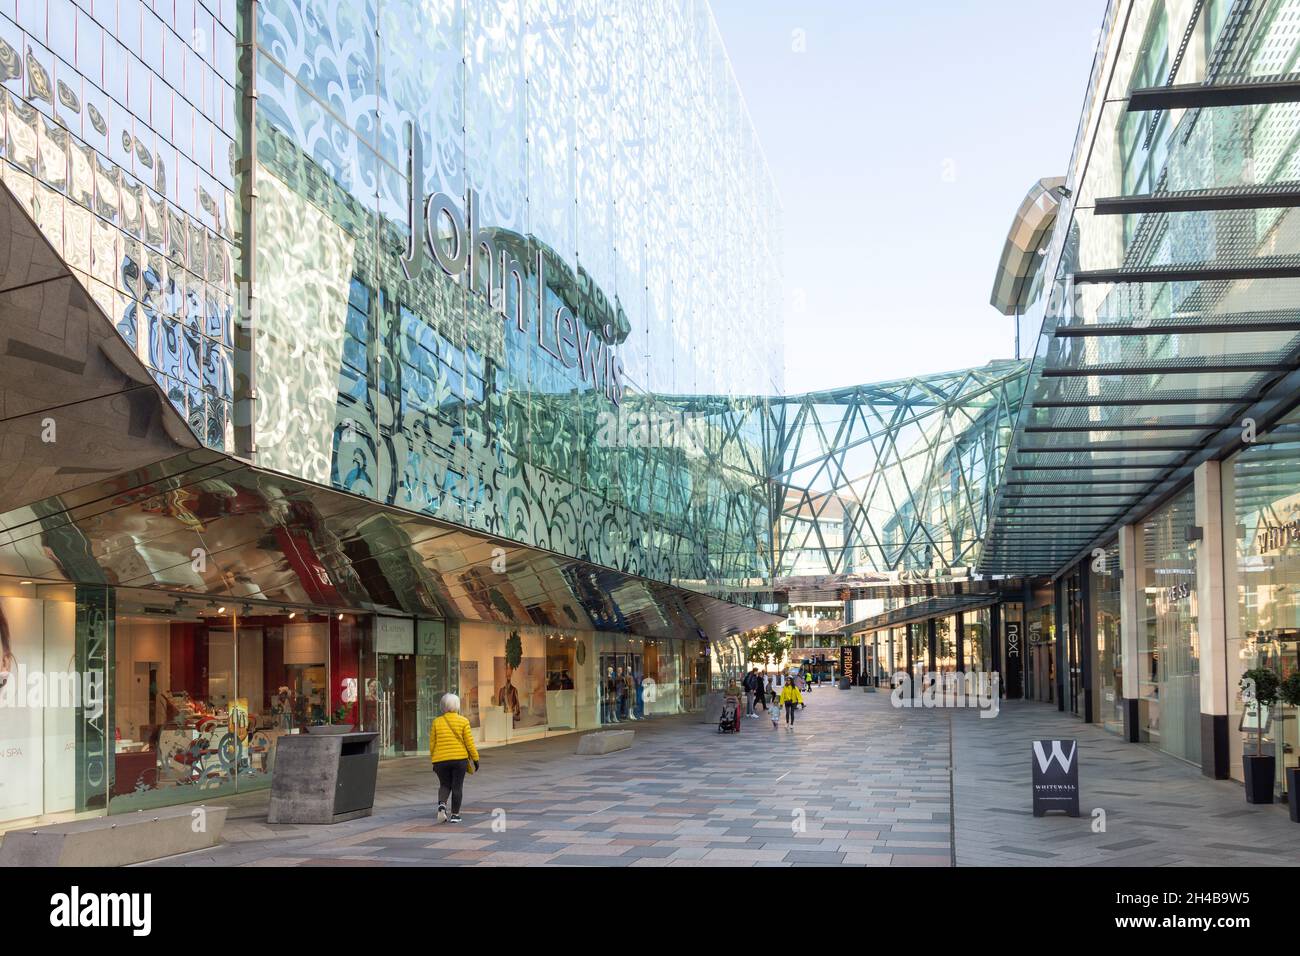 John Lewis department store, Highcross Shopping Centre, High Street, City of Leicester, Leicestershire, England, United Kingdom Stock Photo